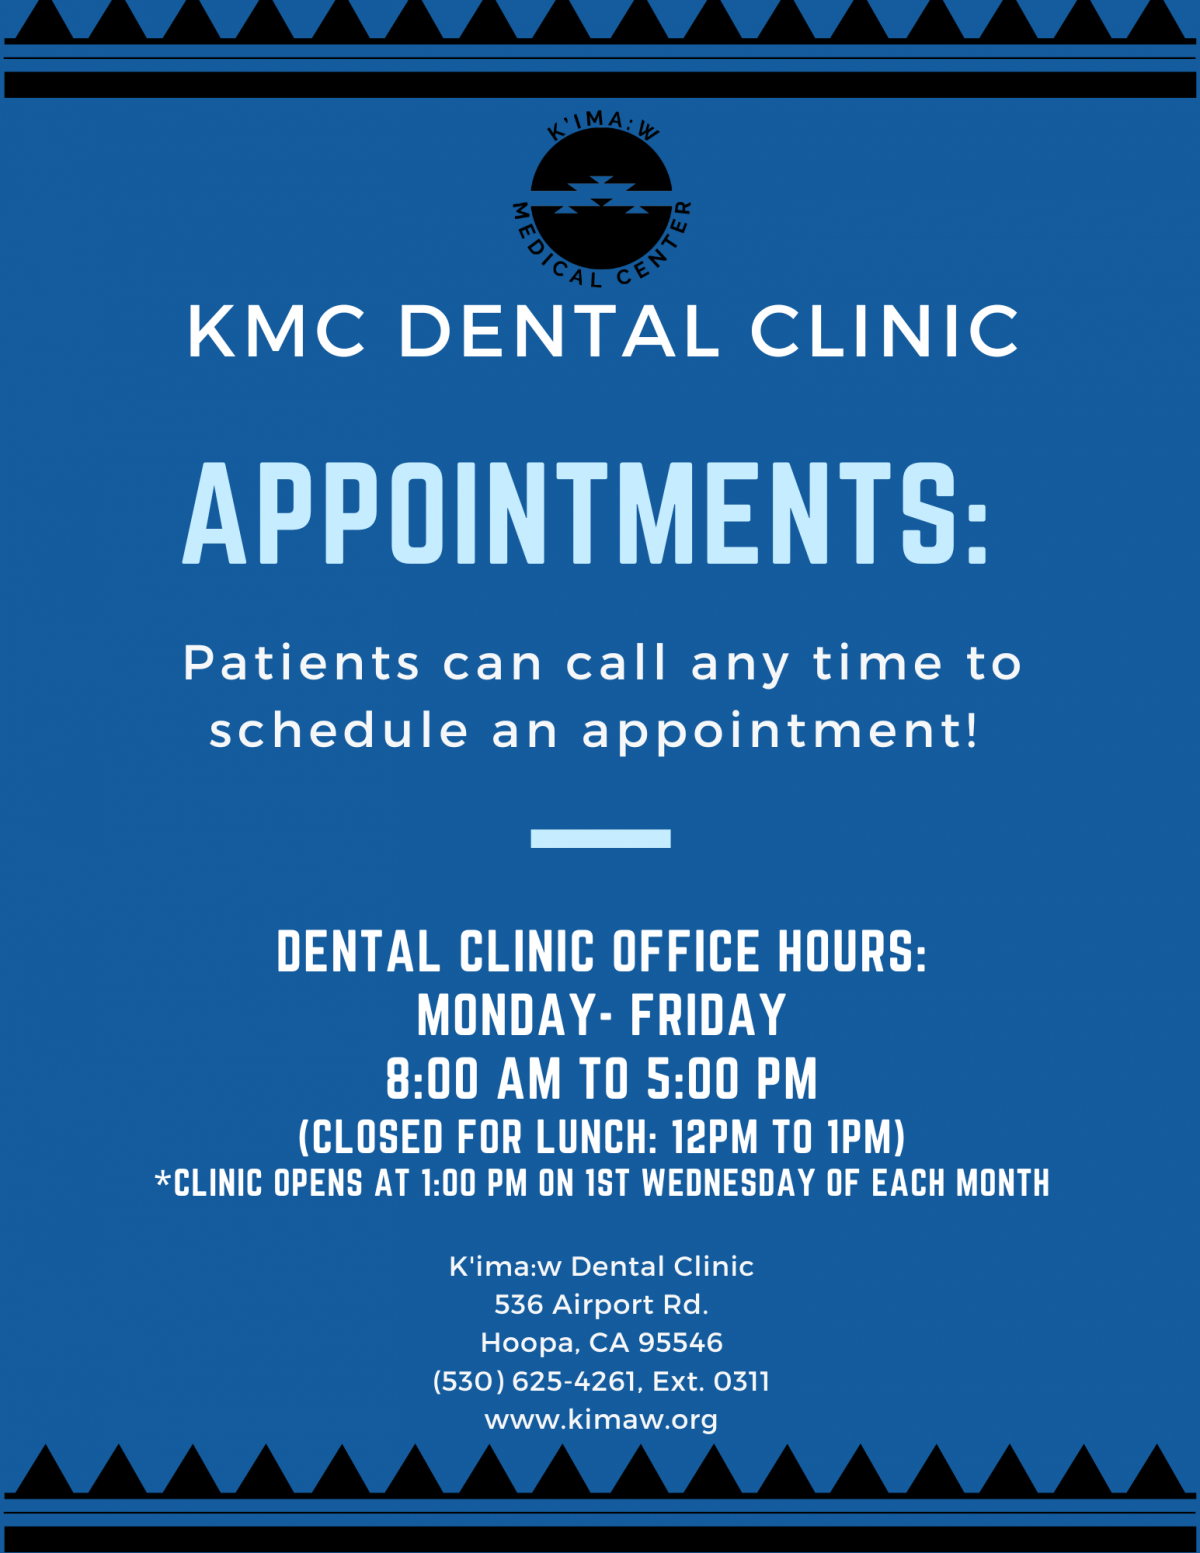 KMC Dental Clinic Appointments